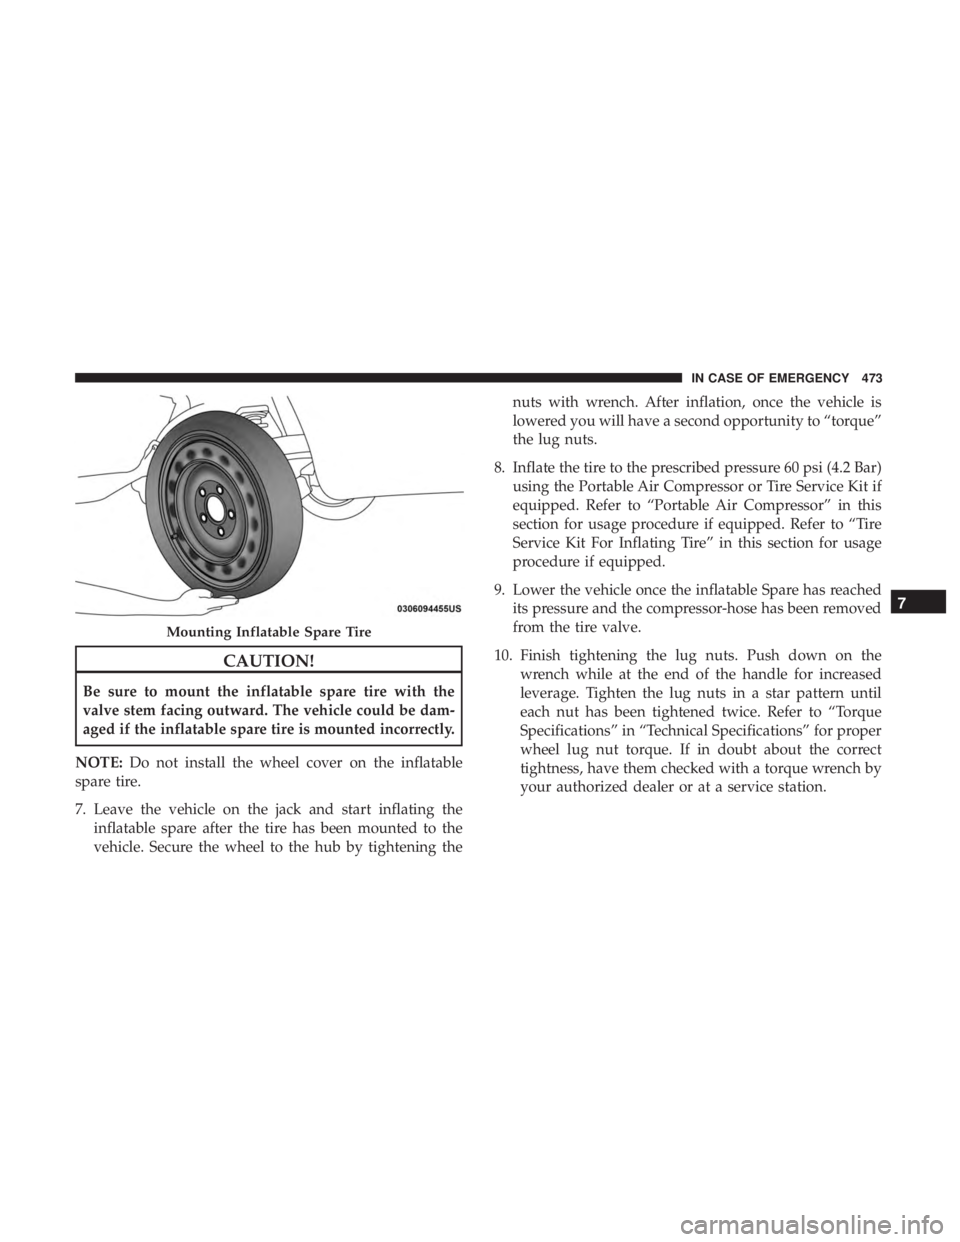 CHRYSLER PACIFICA 2019 User Guide CAUTION!
Be sure to mount the inflatable spare tire with the
valve stem facing outward. The vehicle could be dam-
aged if the inflatable spare tire is mounted incorrectly.
NOTE: Do not install the whe